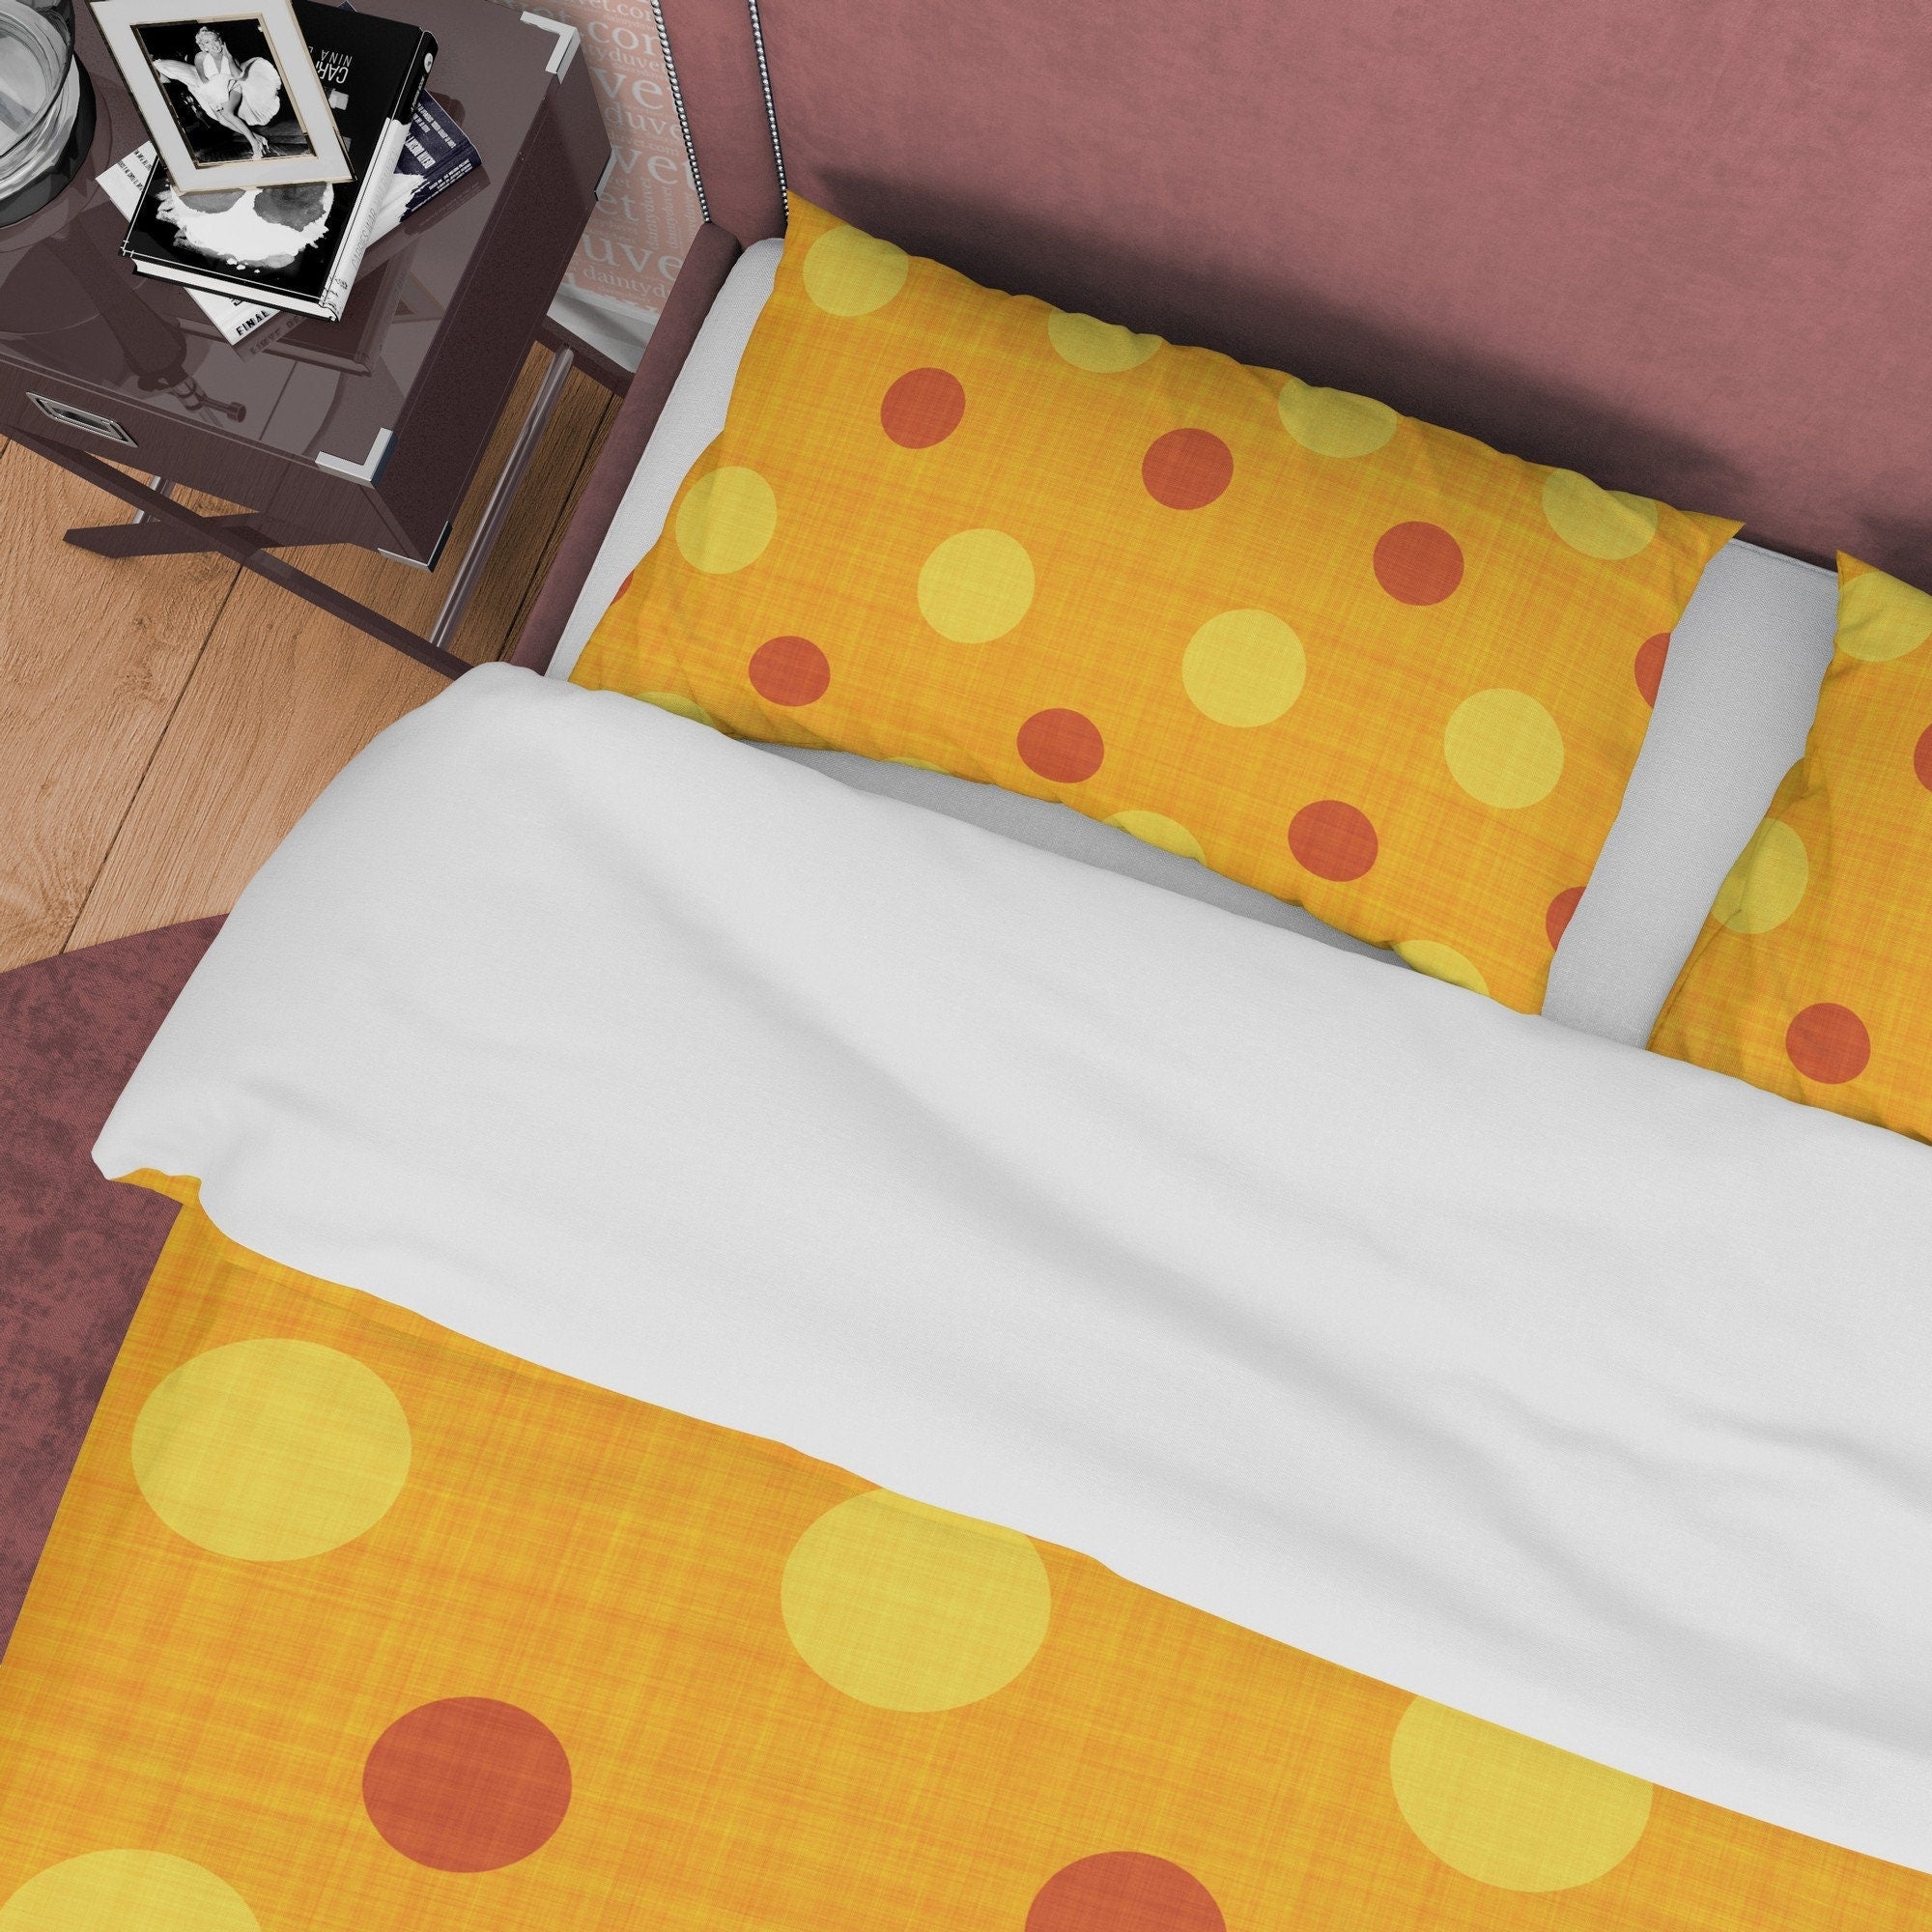 Polka Dot Duvet Cover Geometric Bedding, Brown Dotted Quilt Cover, Yellow Blanket Cover Mid Century Modern Bedroom Set, Colorful Bedspread